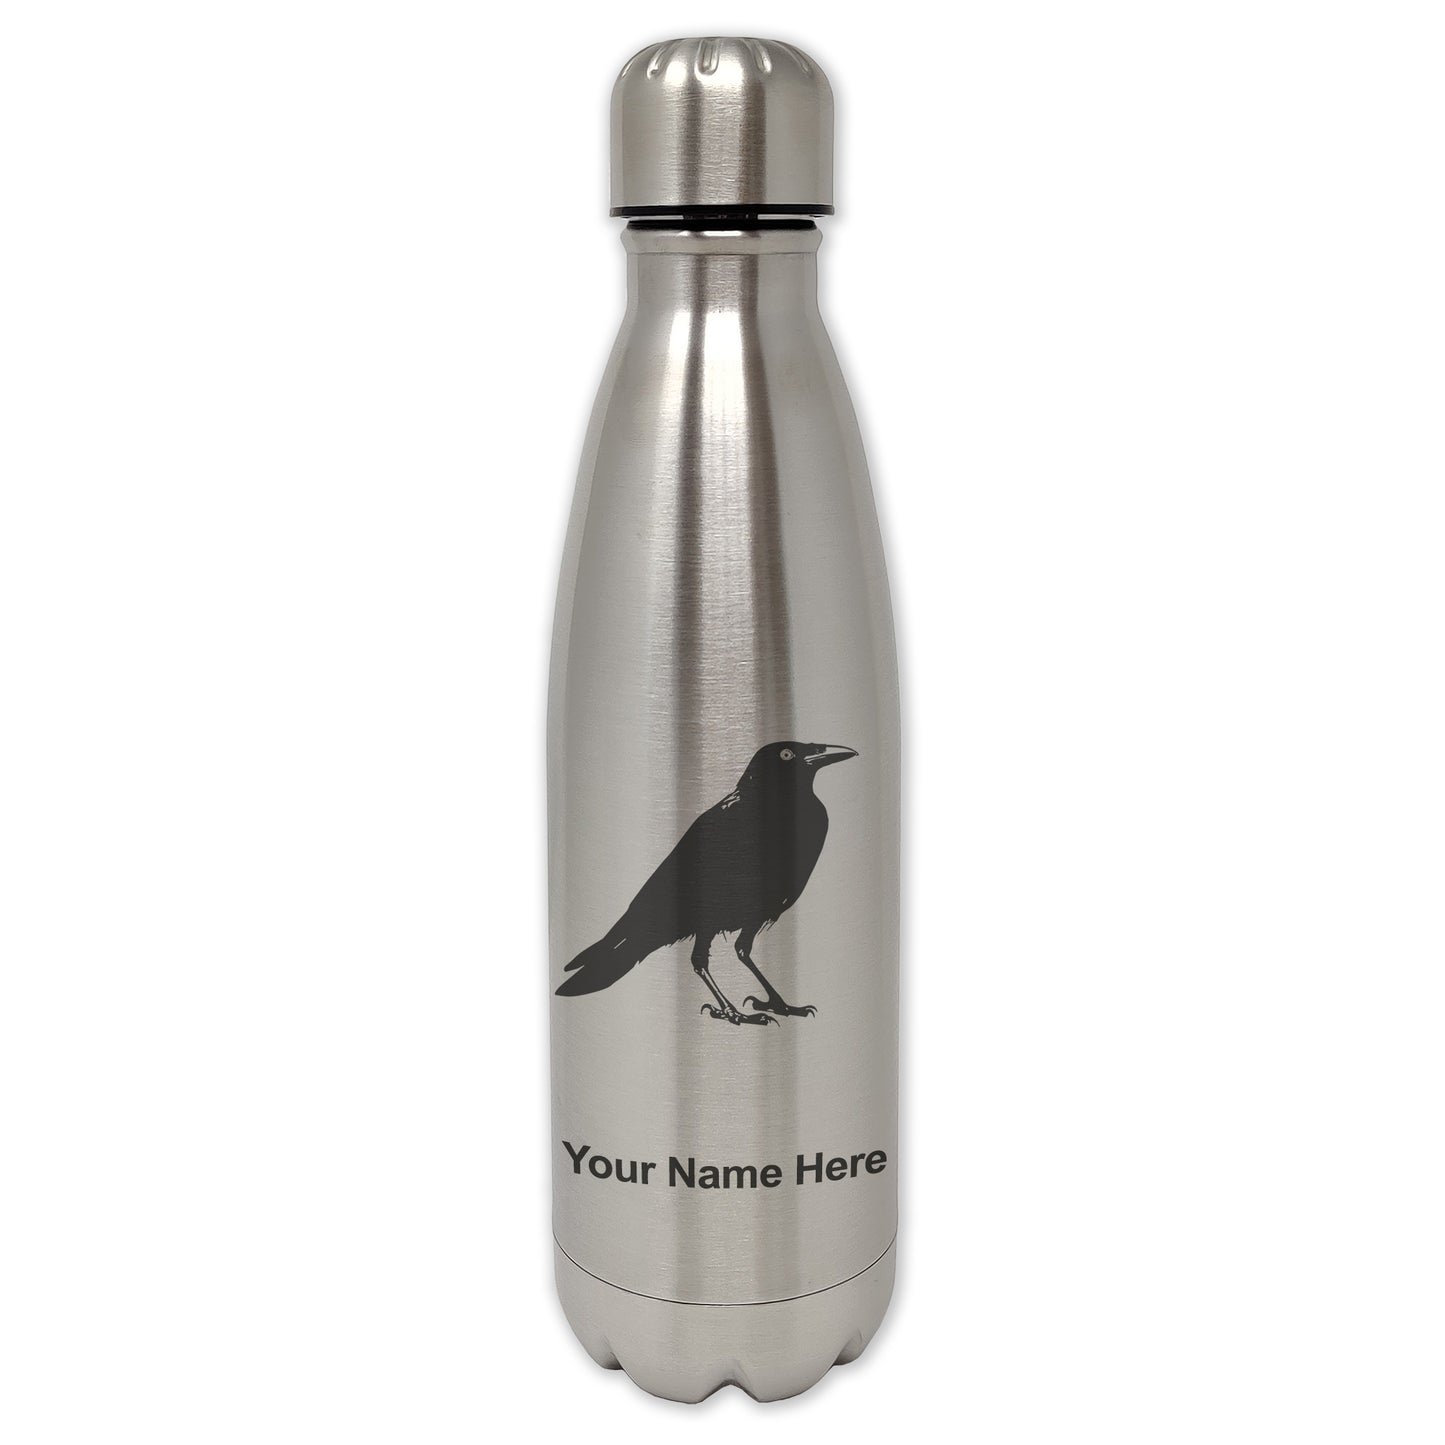 LaserGram Single Wall Water Bottle, Crow, Personalized Engraving Included